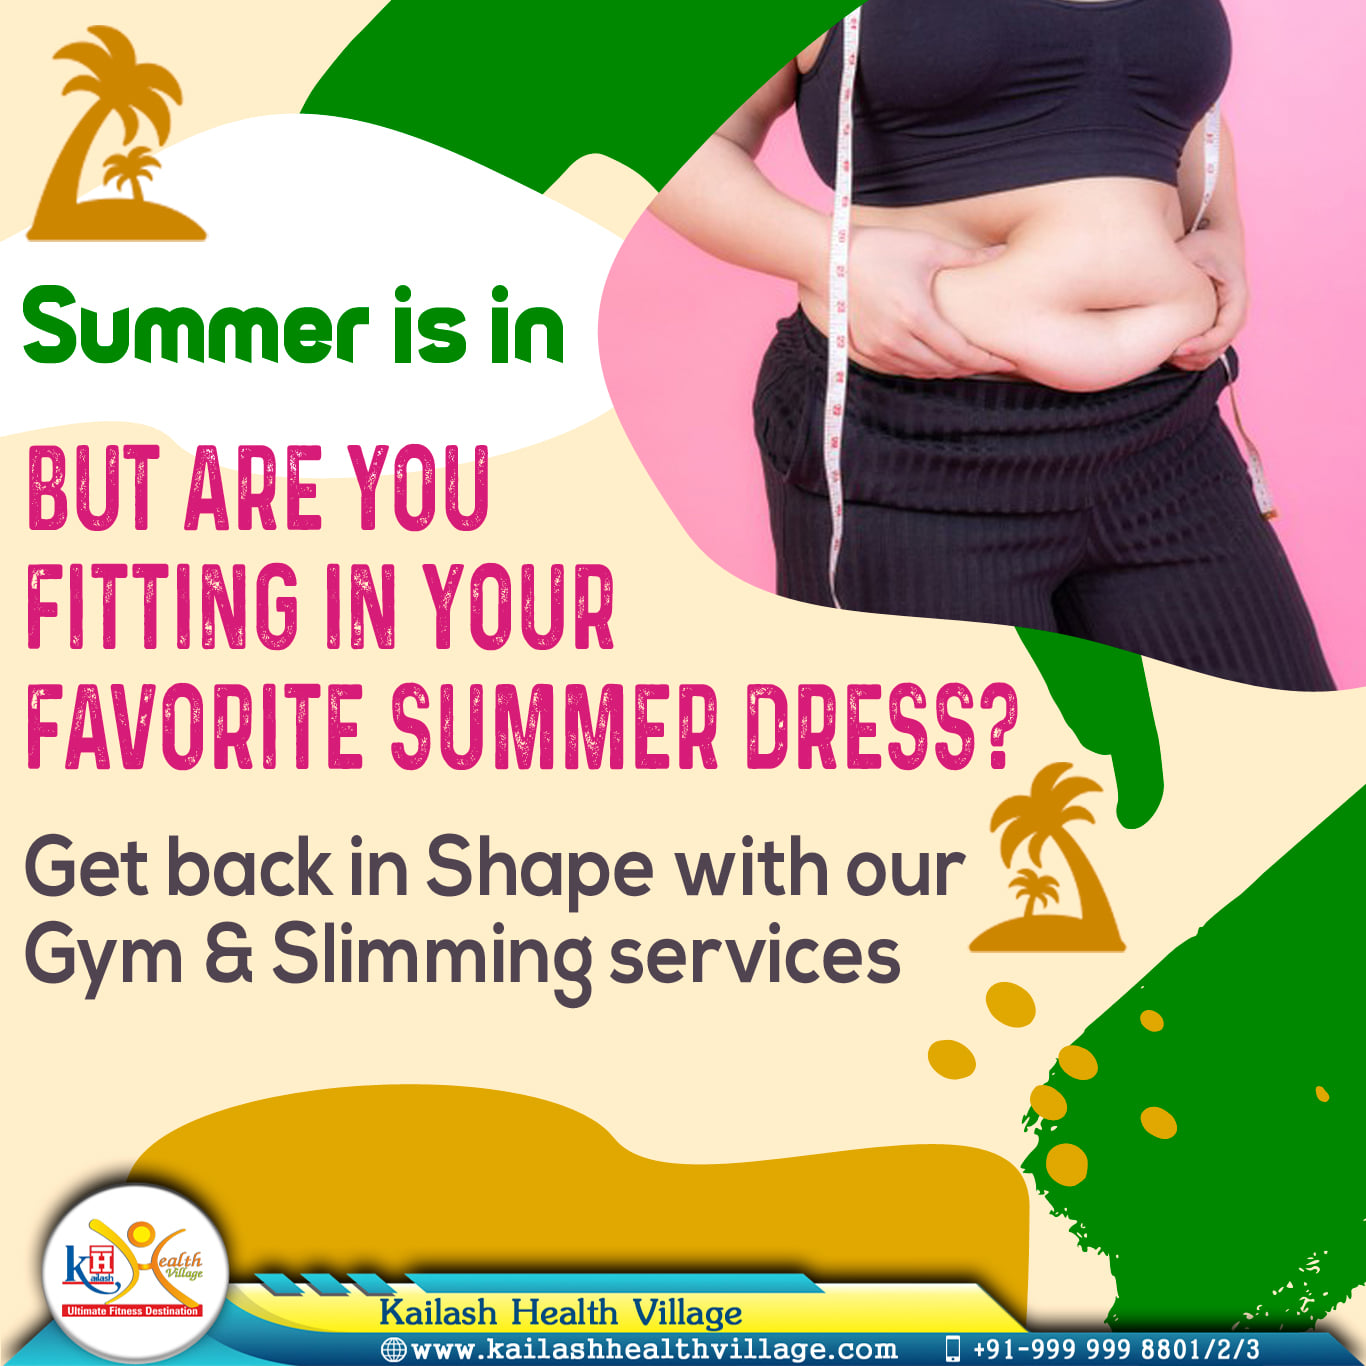 Worried about gaining unexplained excess weight stopping you from putting on your favorite dress?